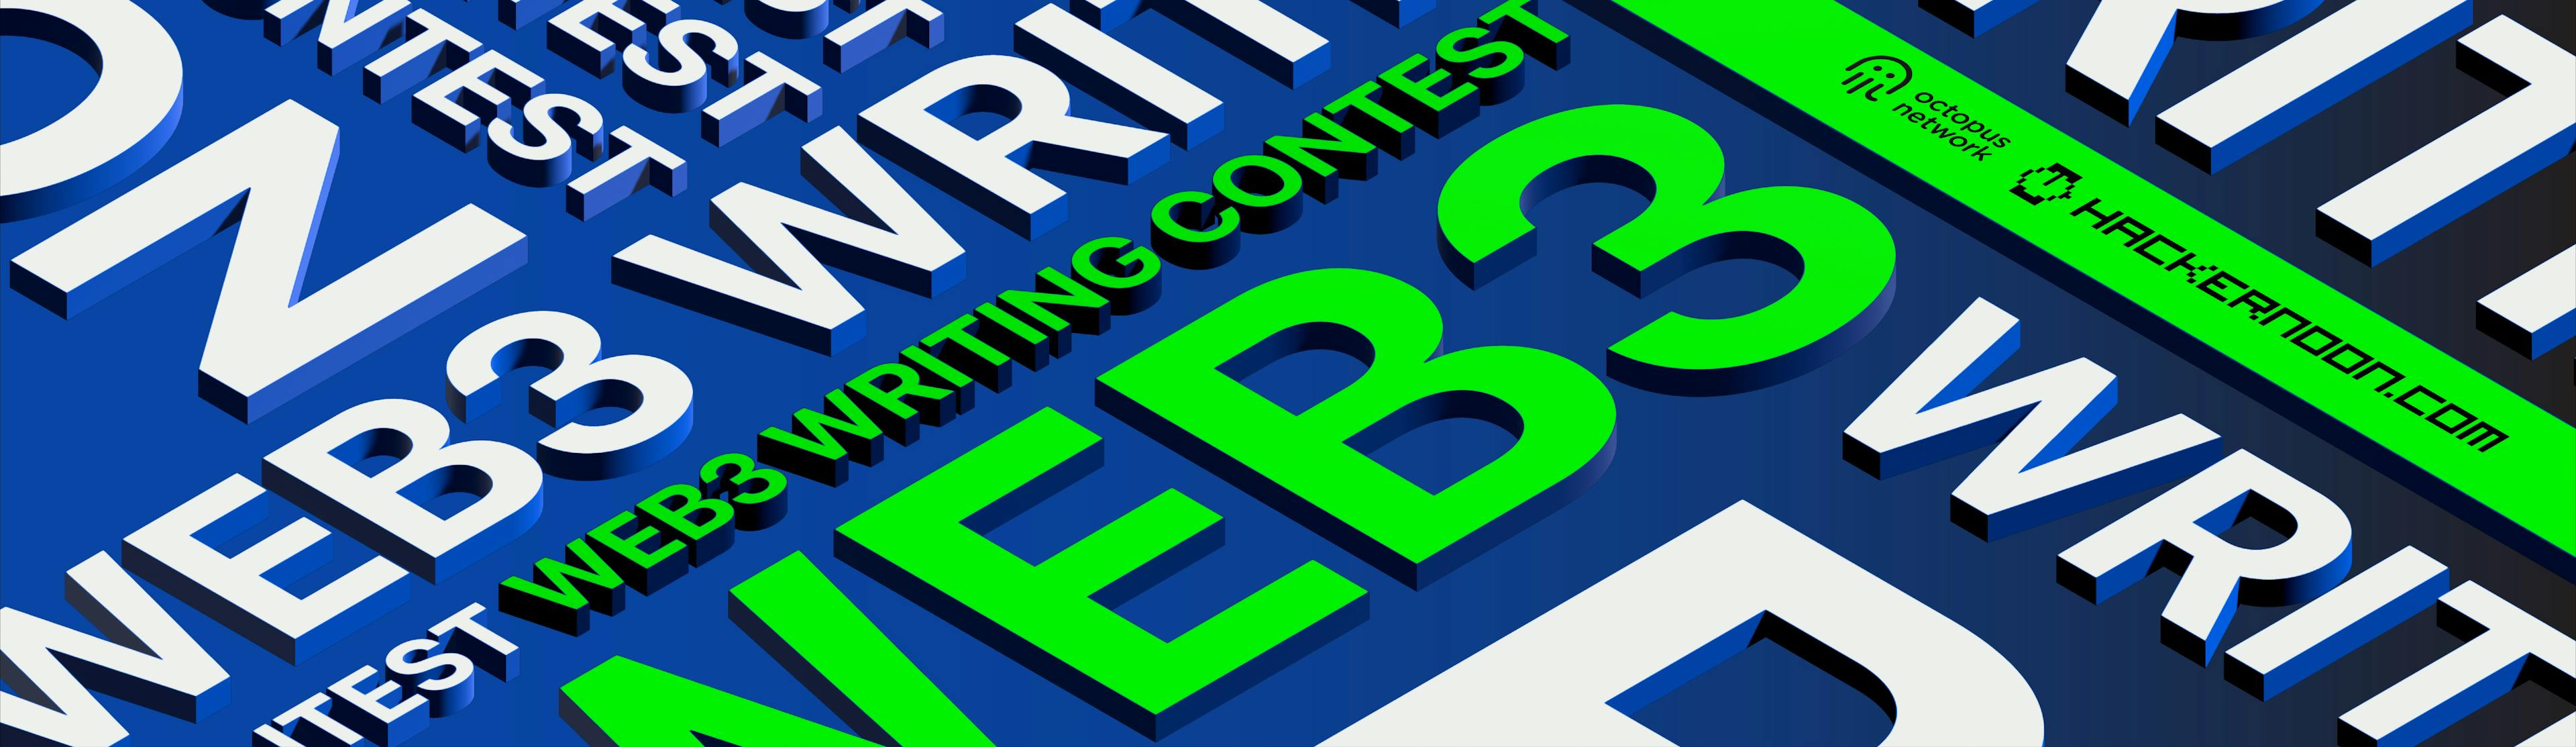 featured image - #Web3 Writing Contest: March 2022 Results Announced!